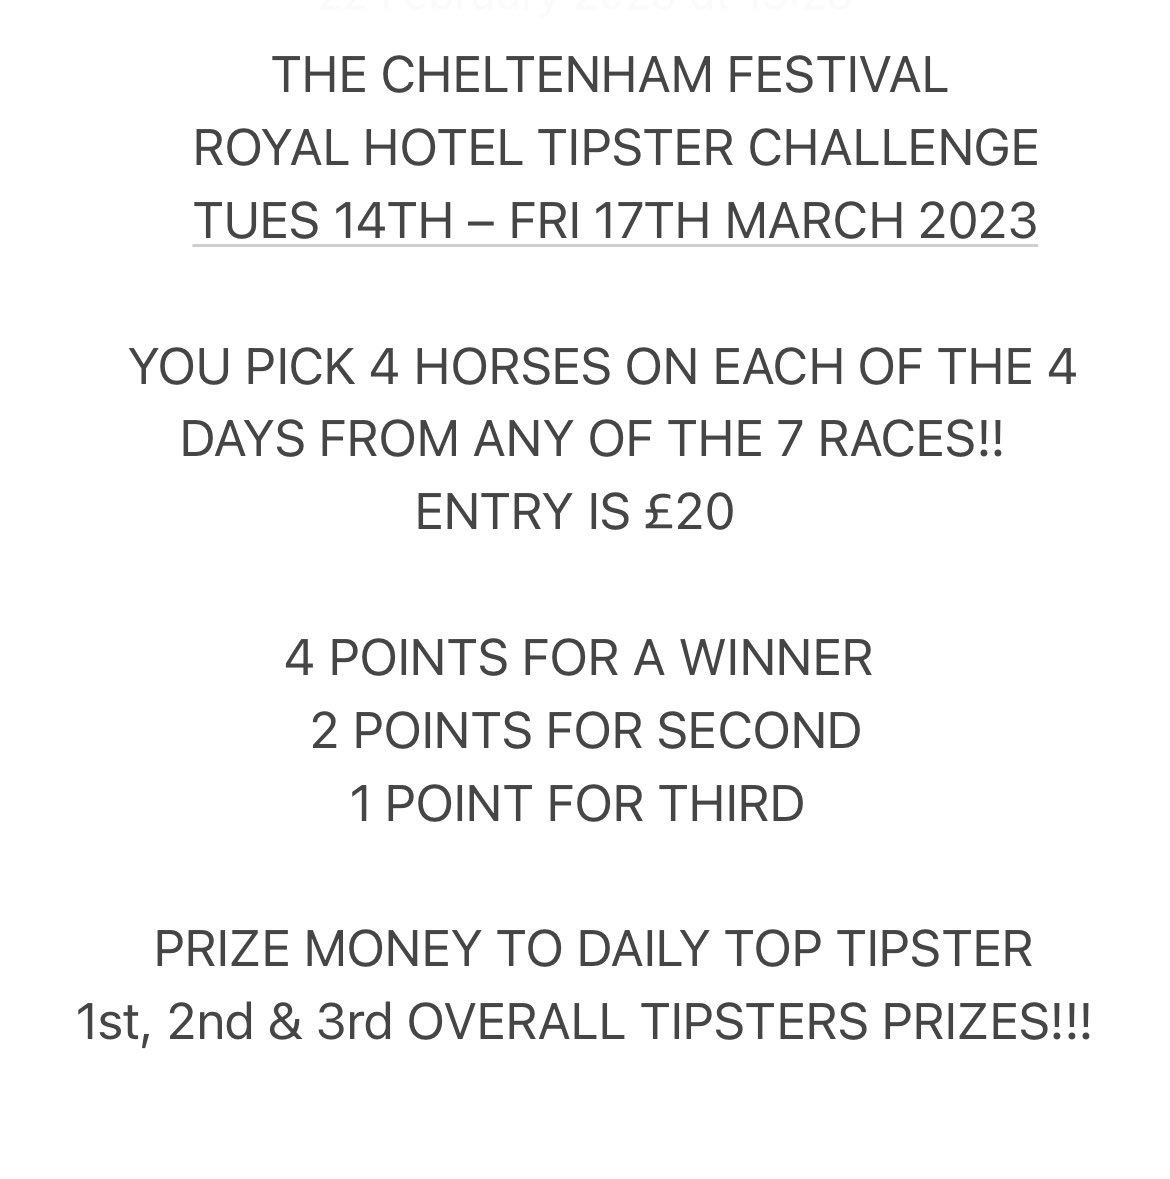 We have a record amount taking part in our #Cheltenham2023 tipster challenge 
Over 220 taking part this year 👏🏻👏🏻👏🏻
Thank you to each & everyone of you taking part 🏇🏼🏆💰 #RecordYear